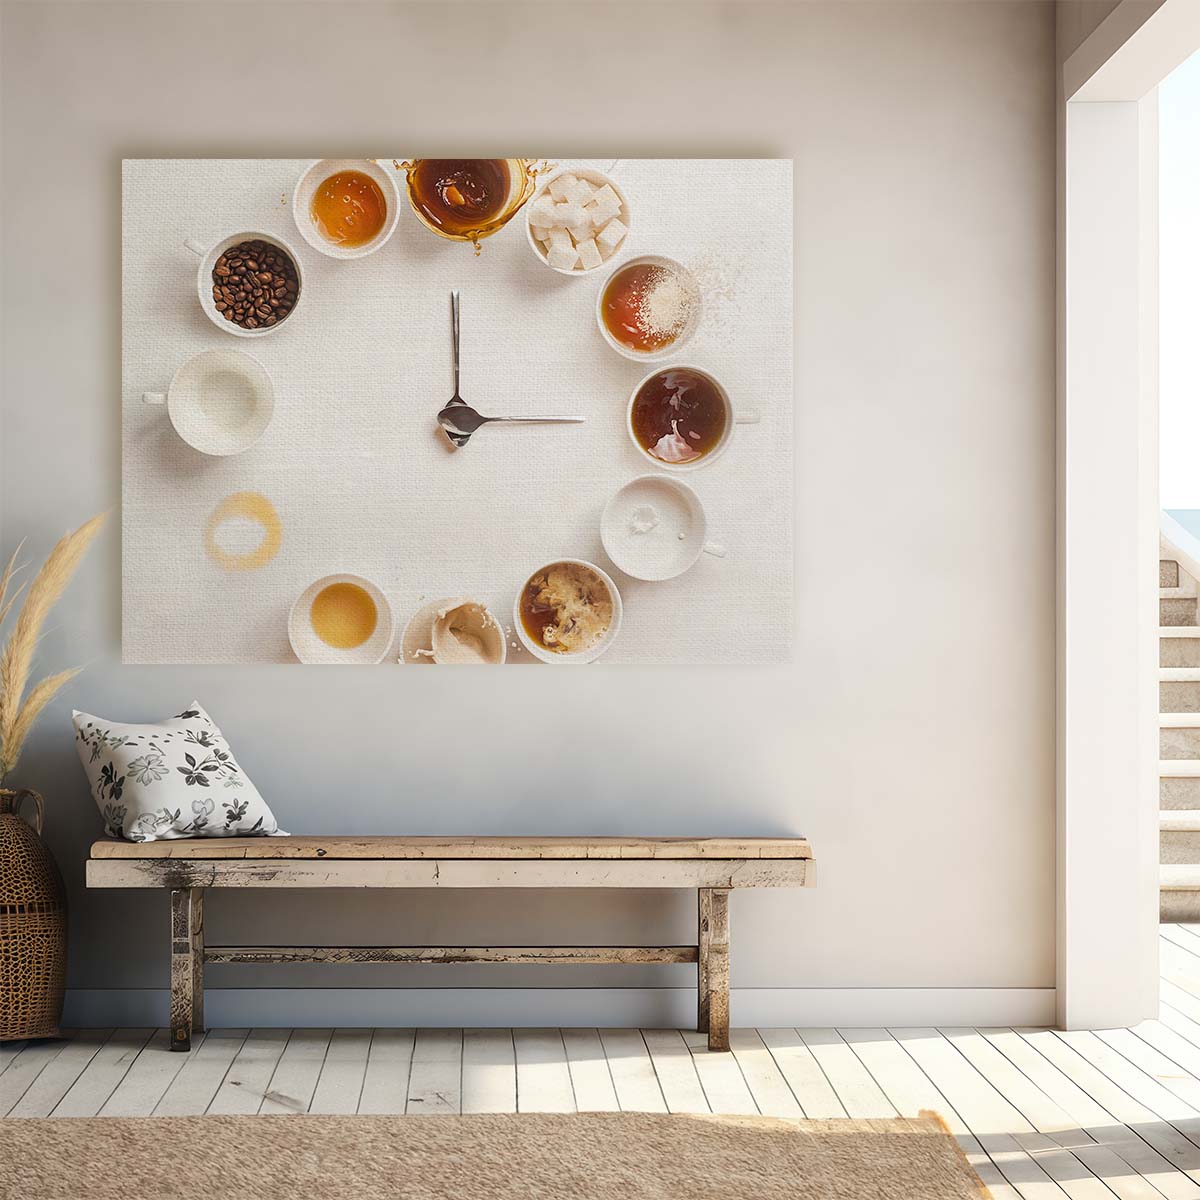 Coffee Time Splendor Cups, Beans & Splashes Wall Art by Luxuriance Designs. Made in USA.